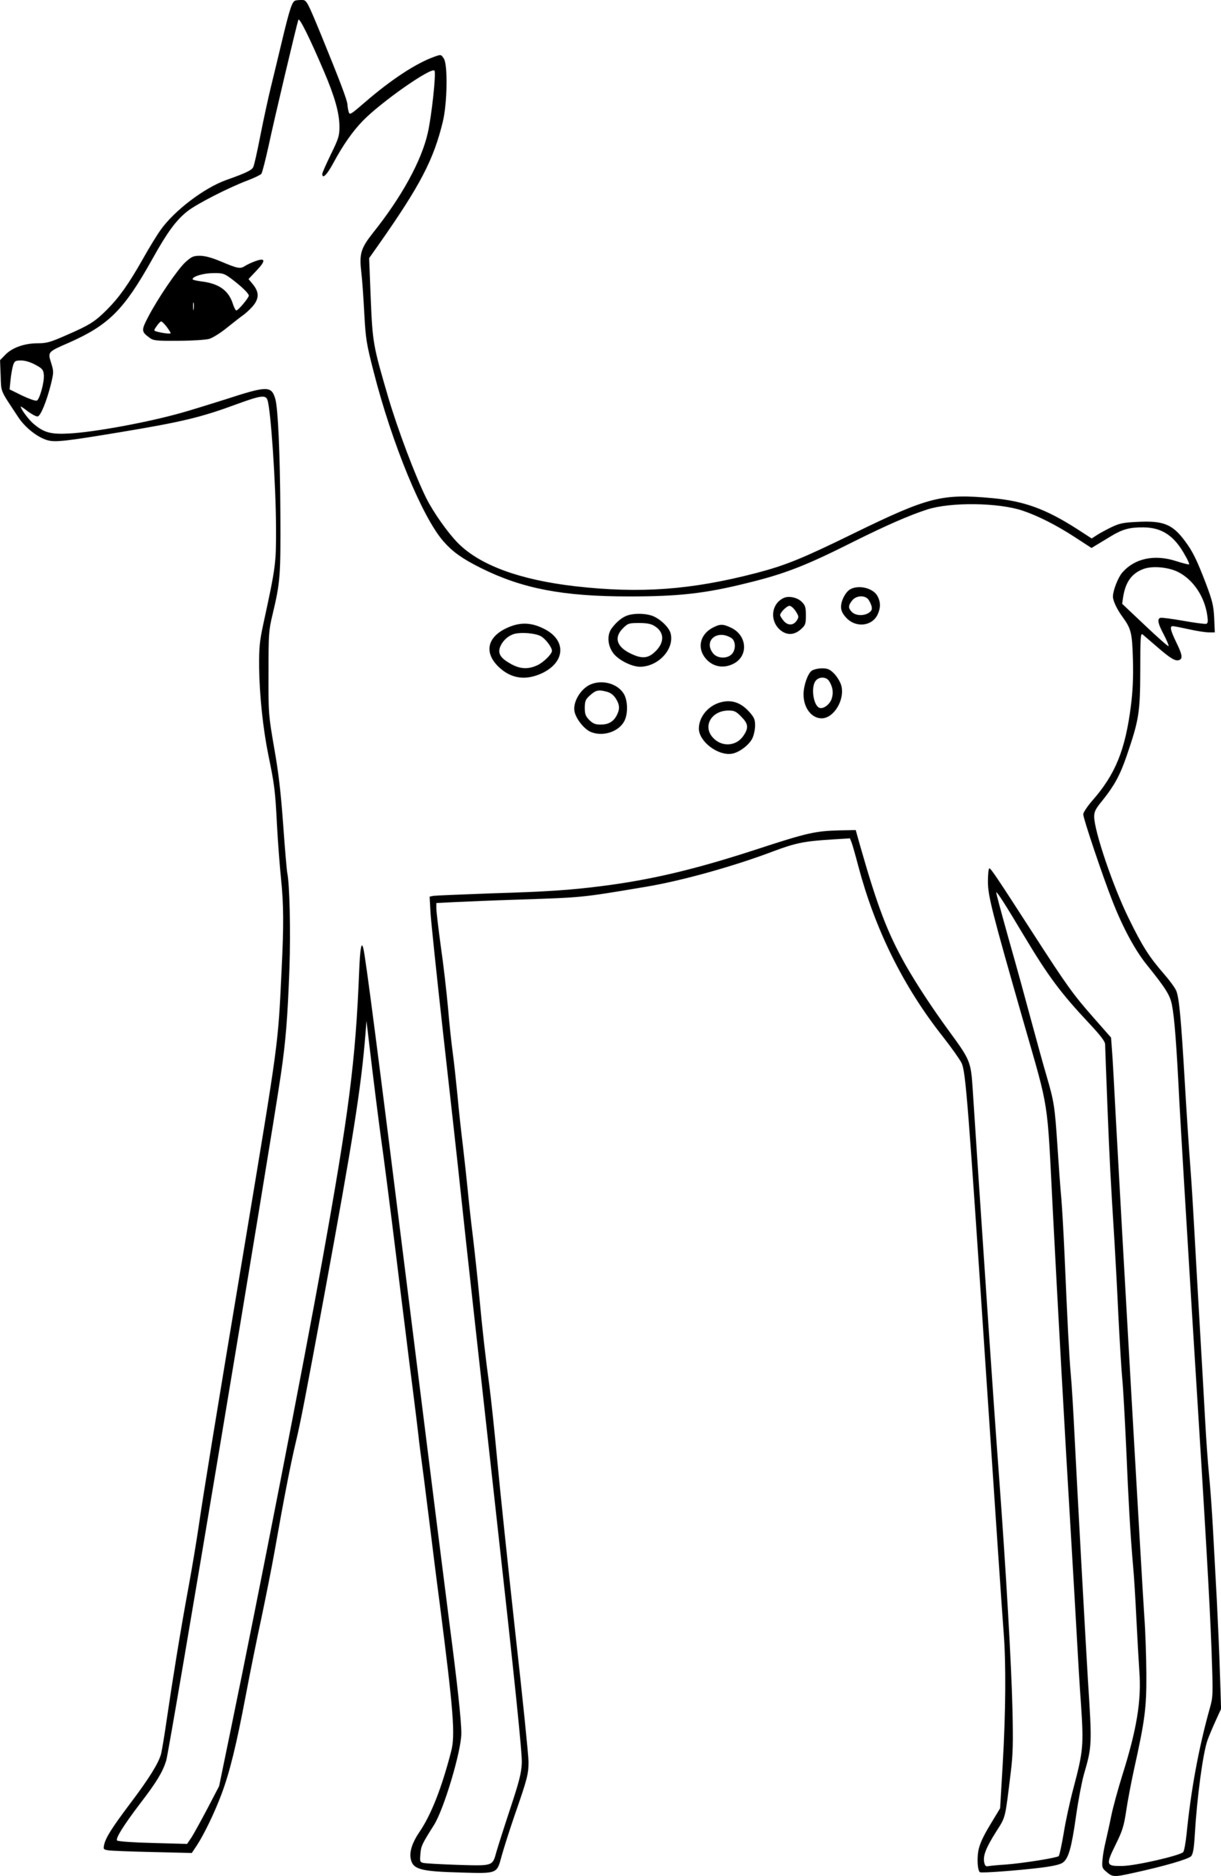 Easy Little Spotted Deer Coloring Page